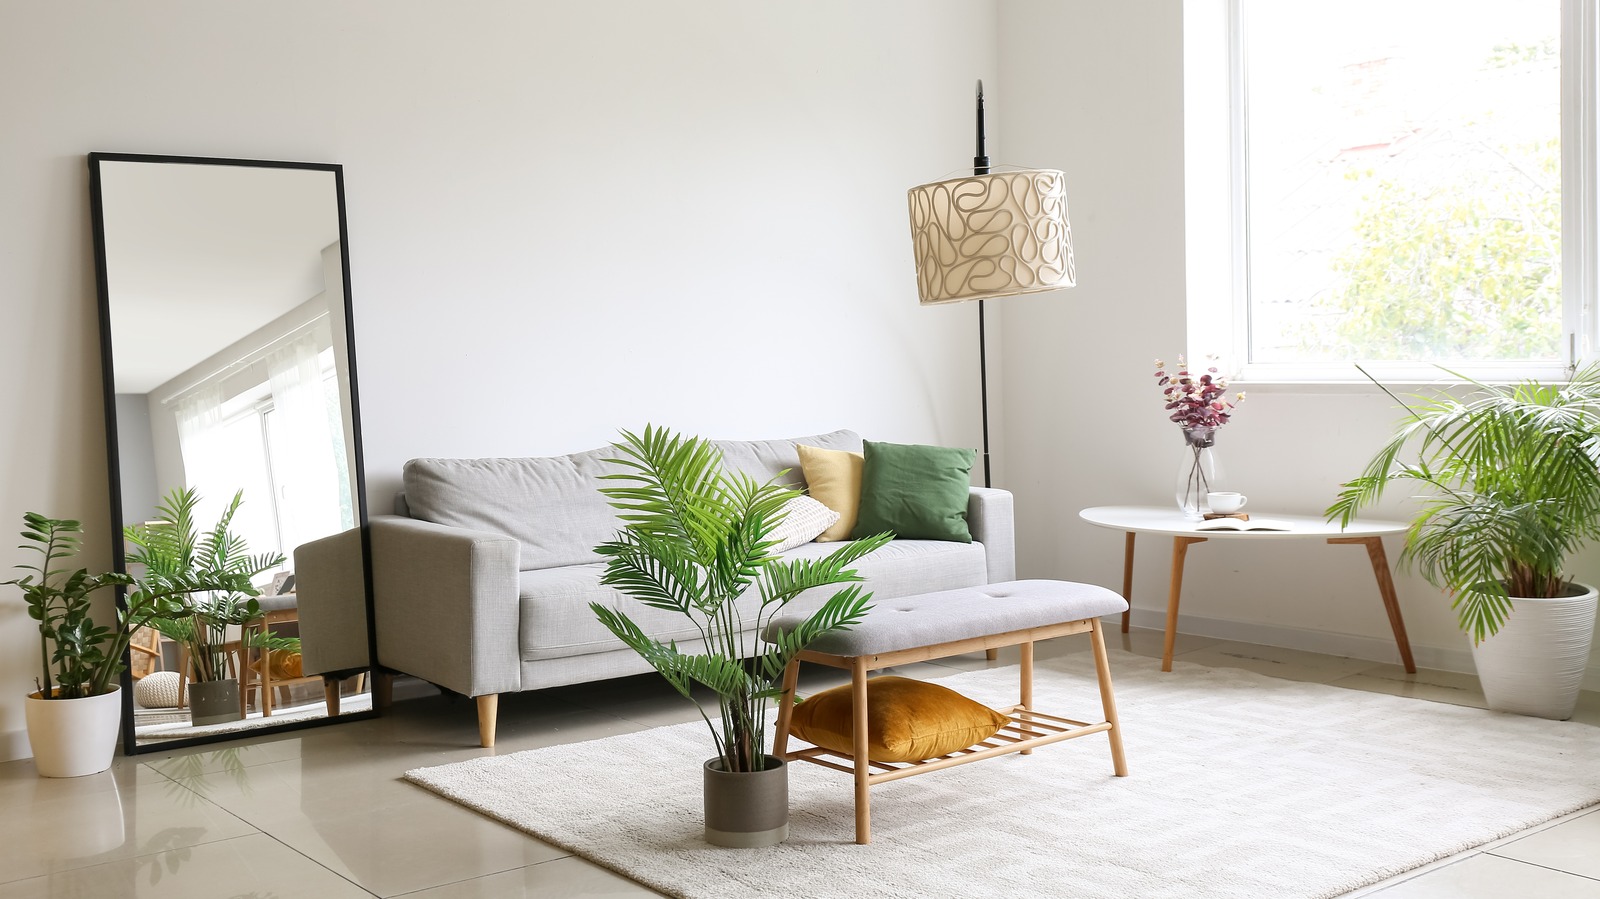 How To Fill An Empty Space In Living Room